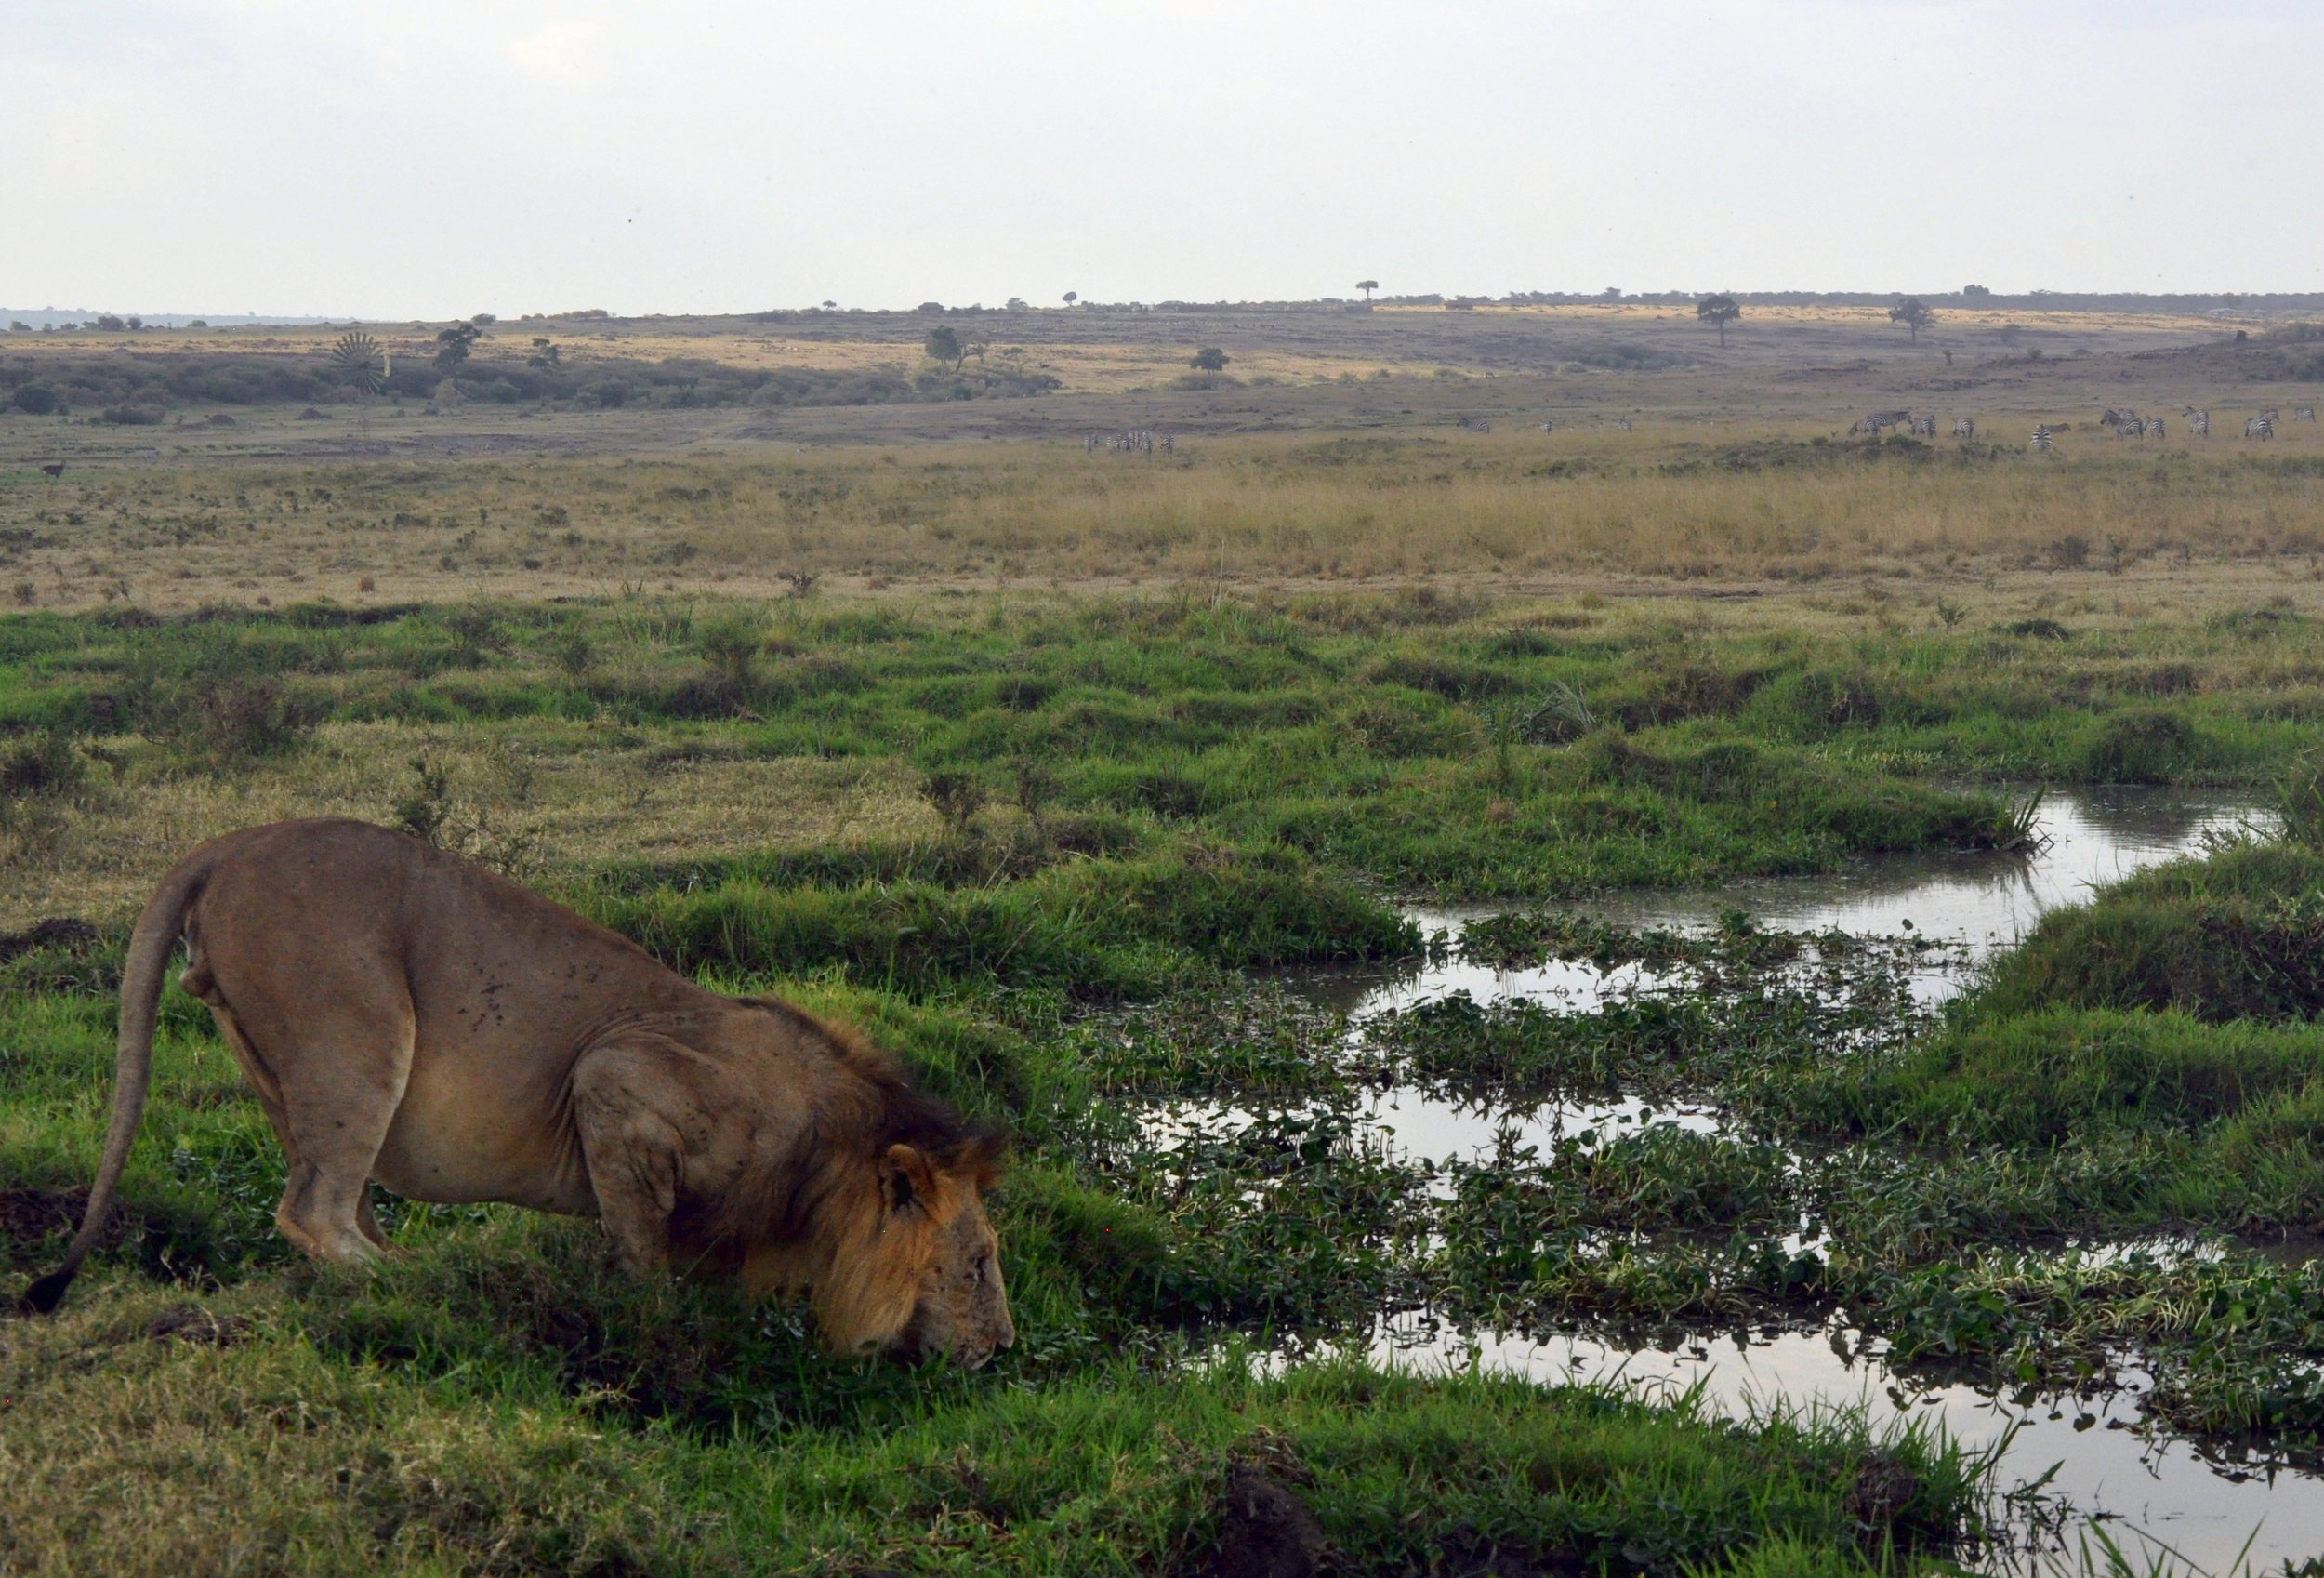 Male Lion in the Marsh, zebras in the distance